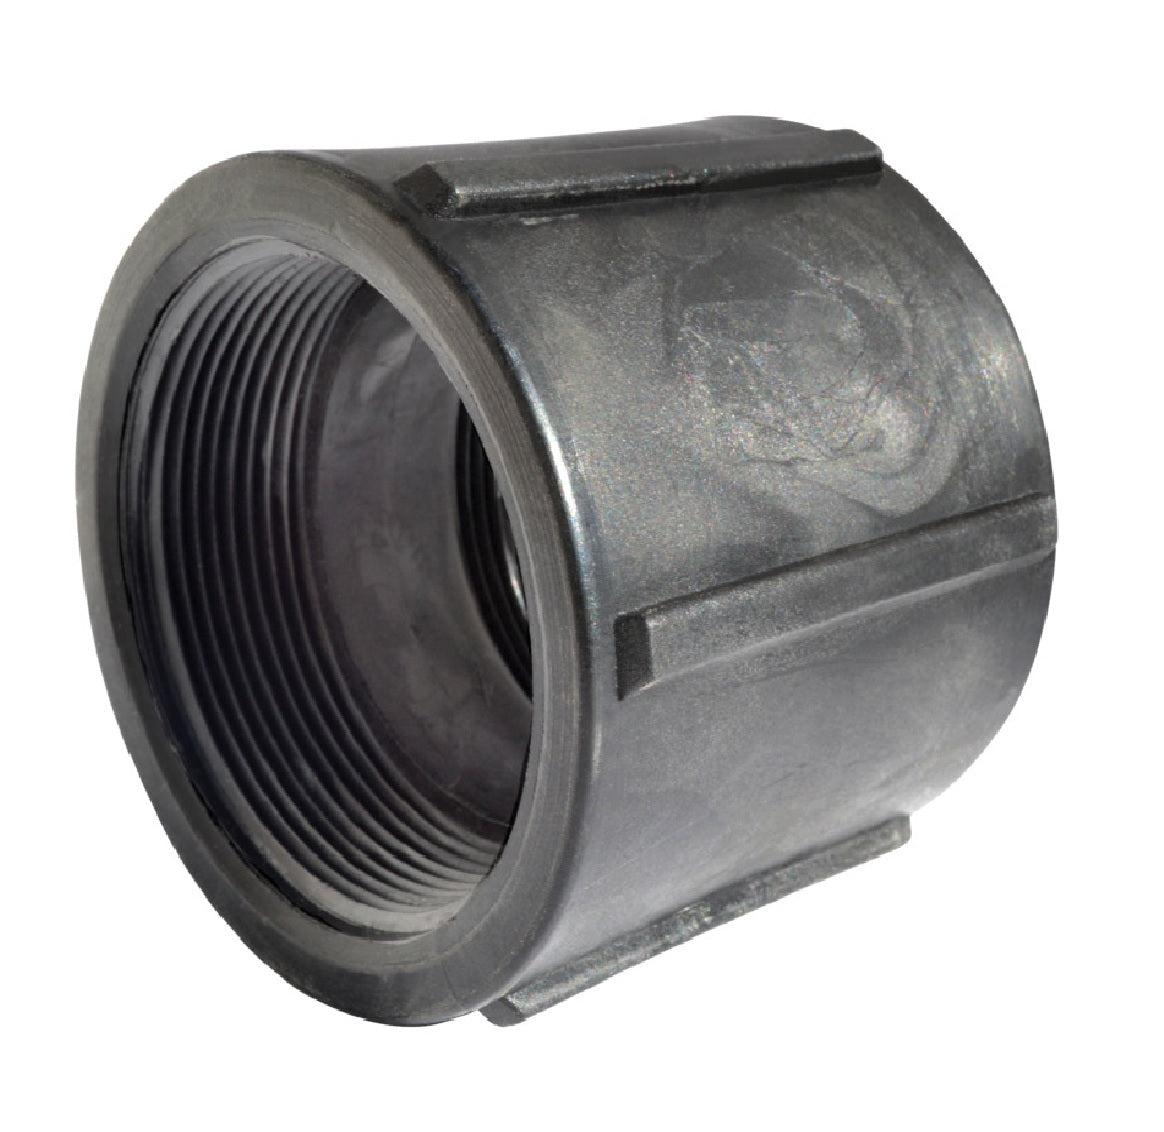 Green Leaf CPLG100 Coupling, Schedule 80